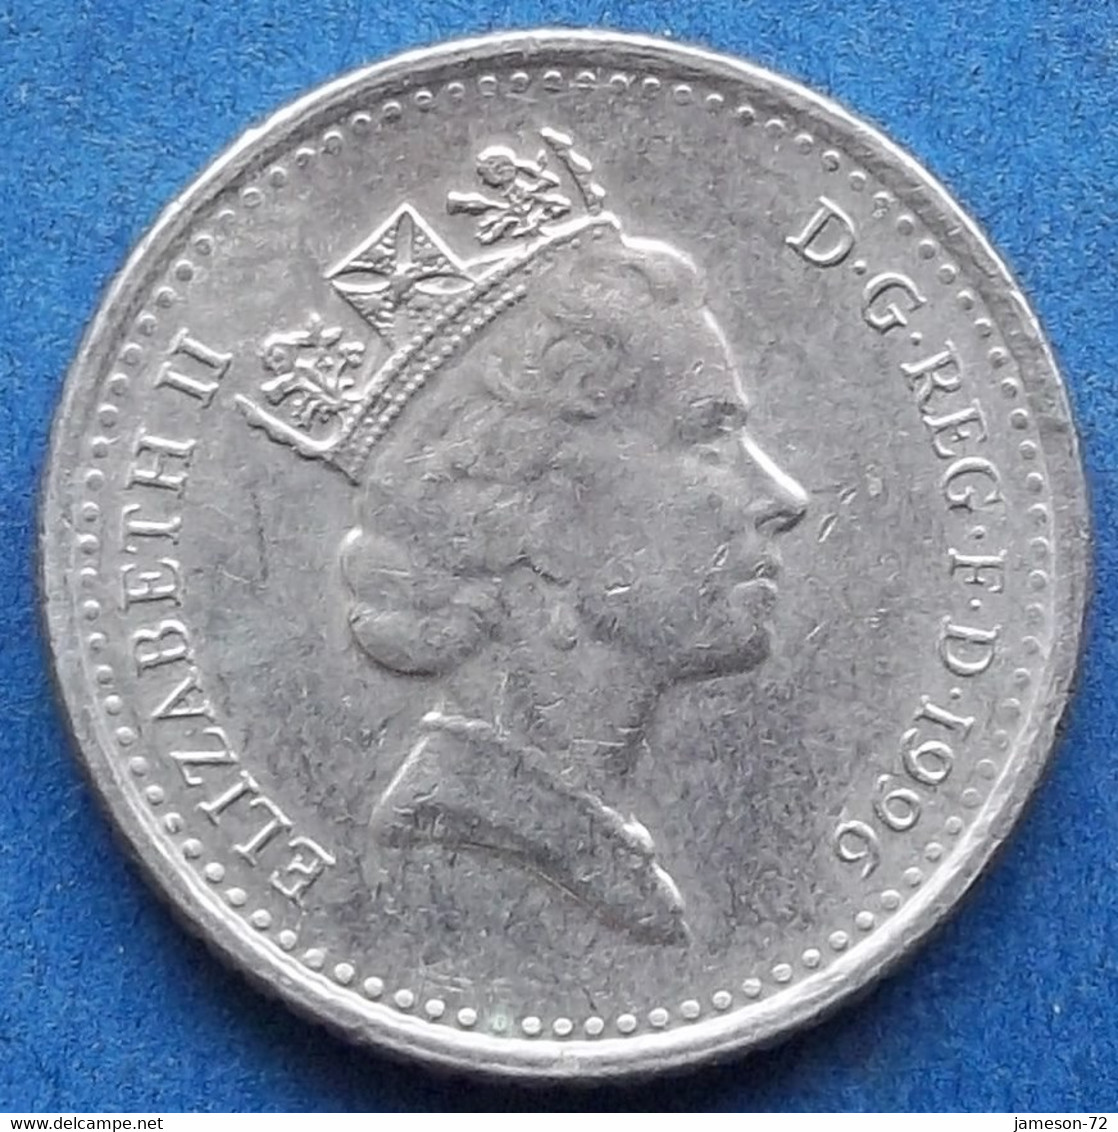 UK - 5 Pence 1996 "Crowned Thistle" KM# 937b Elizabeth II Decimal Coinage (1971-2022) - Edelweiss Coins - 5 Pence & 5 New Pence